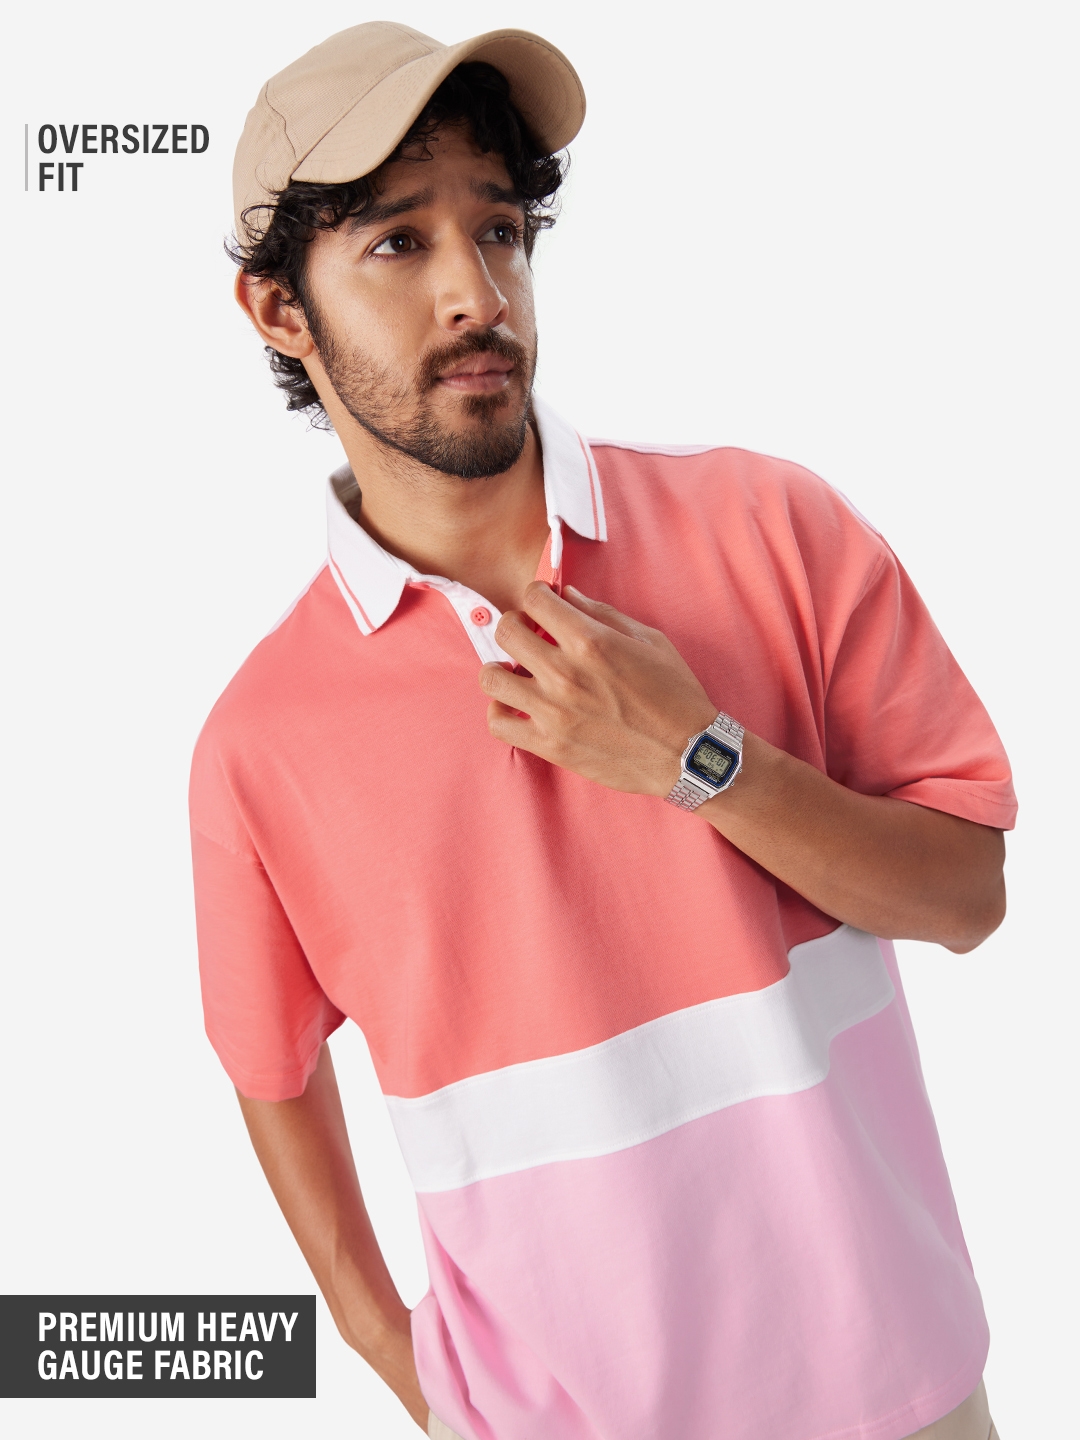 Men's Solids: Watermelon, White and Pink (Colourblock) Oversized Polo T-Shirt